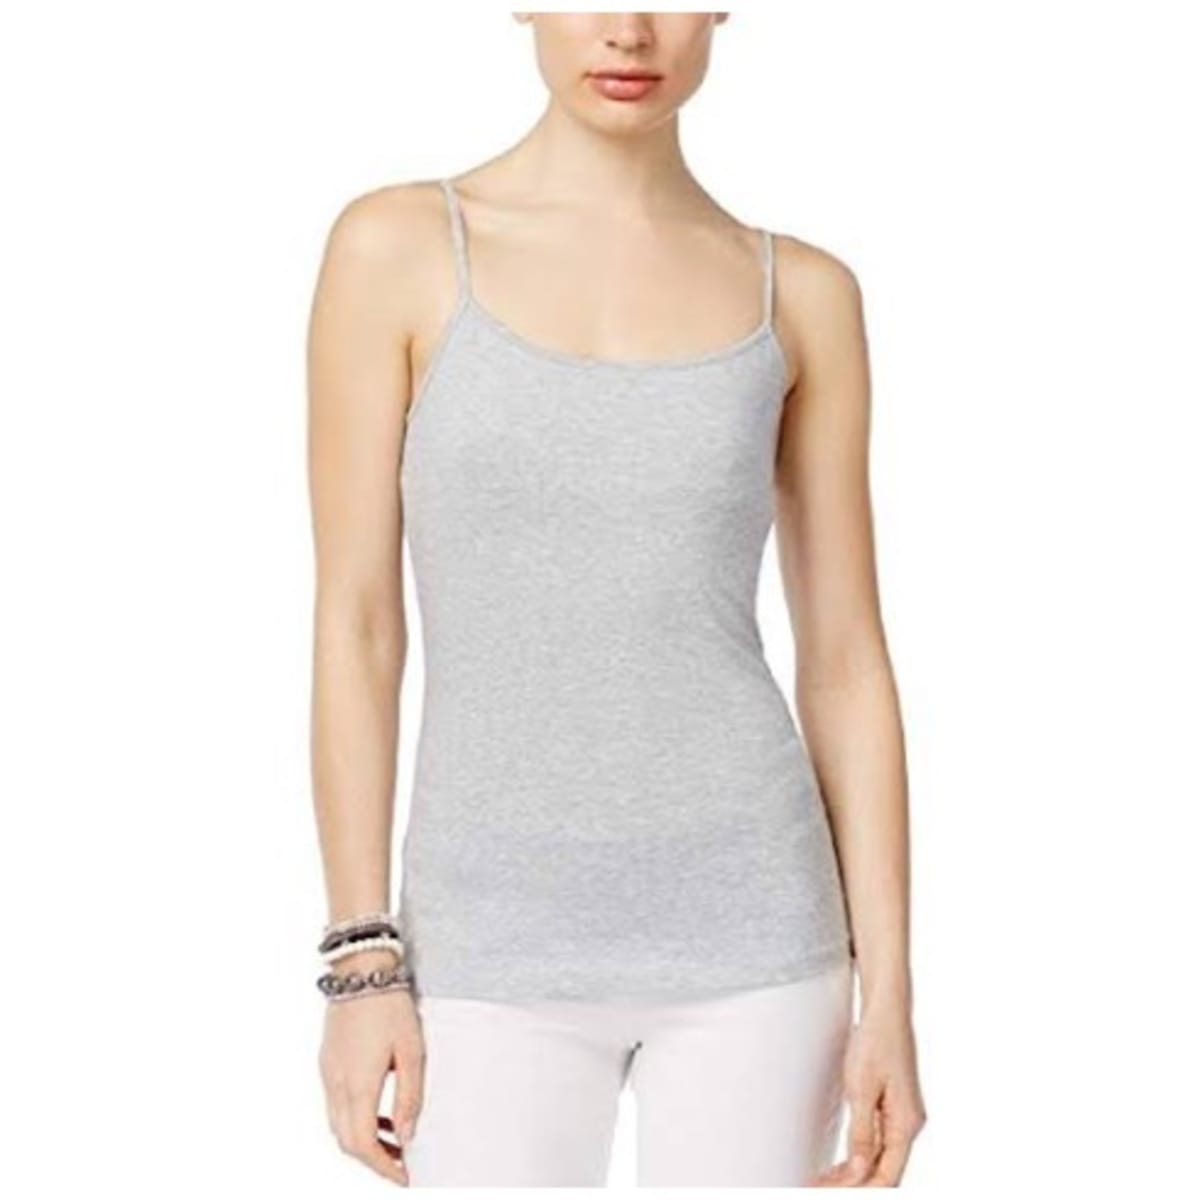 Atmosphere Ladies Stretchy Camisole - Light Grey